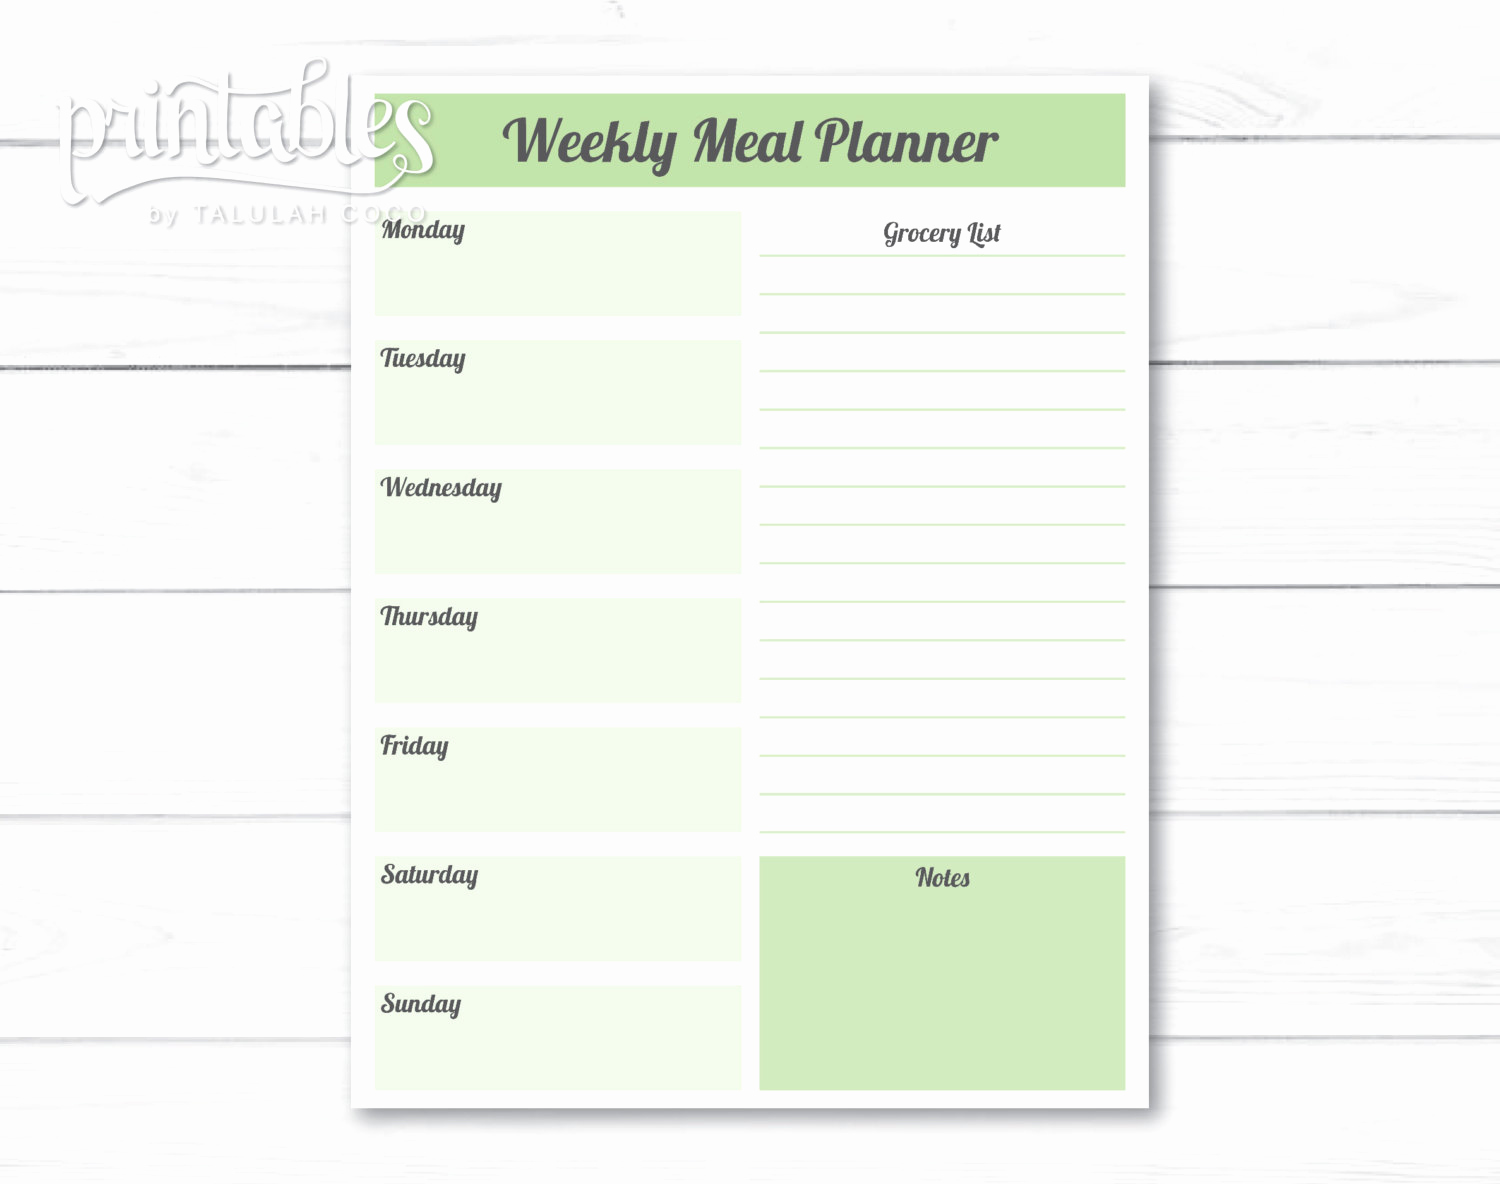 Weekly Meal Planning Template Best Of Editable Meal Planner Template Weekly Meal Planner with